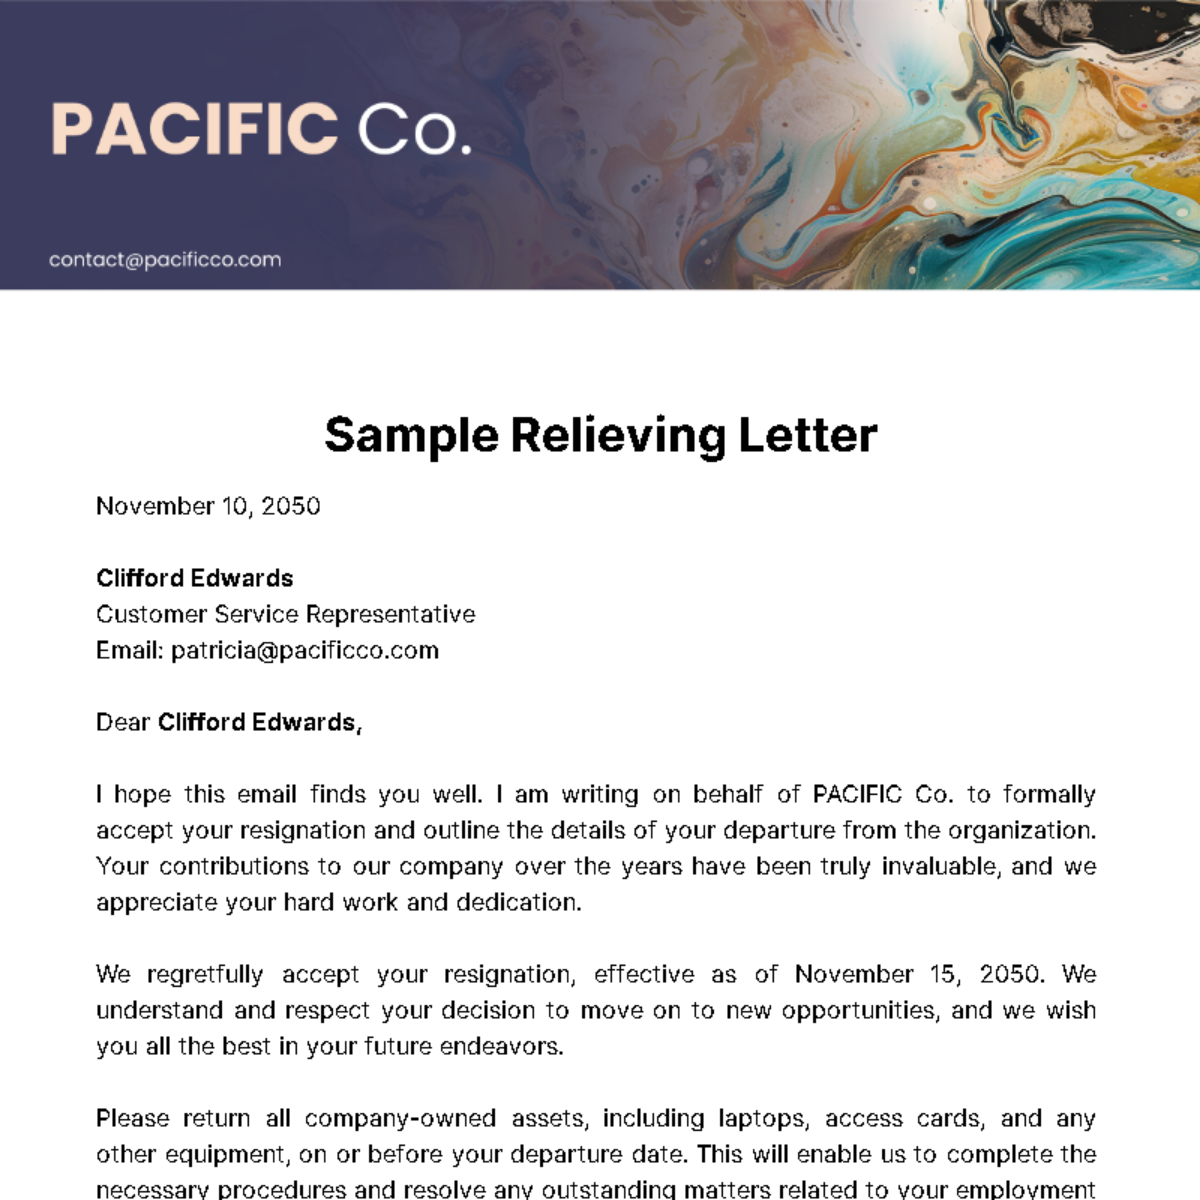 Sample Relieving Letter Template